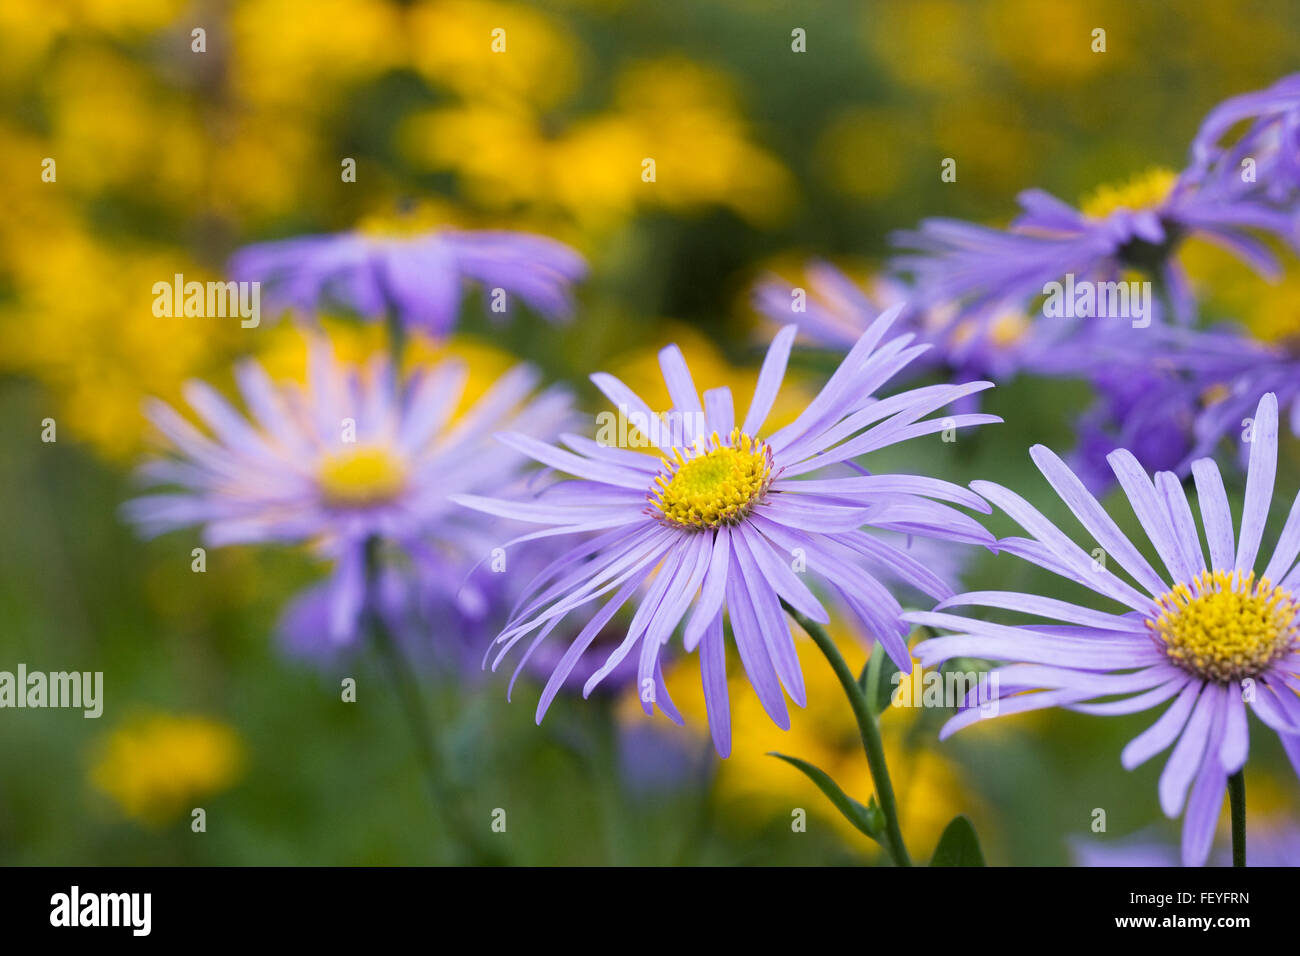 Aster x frikartii 'Monch' in an herbaceous border. Stock Photo